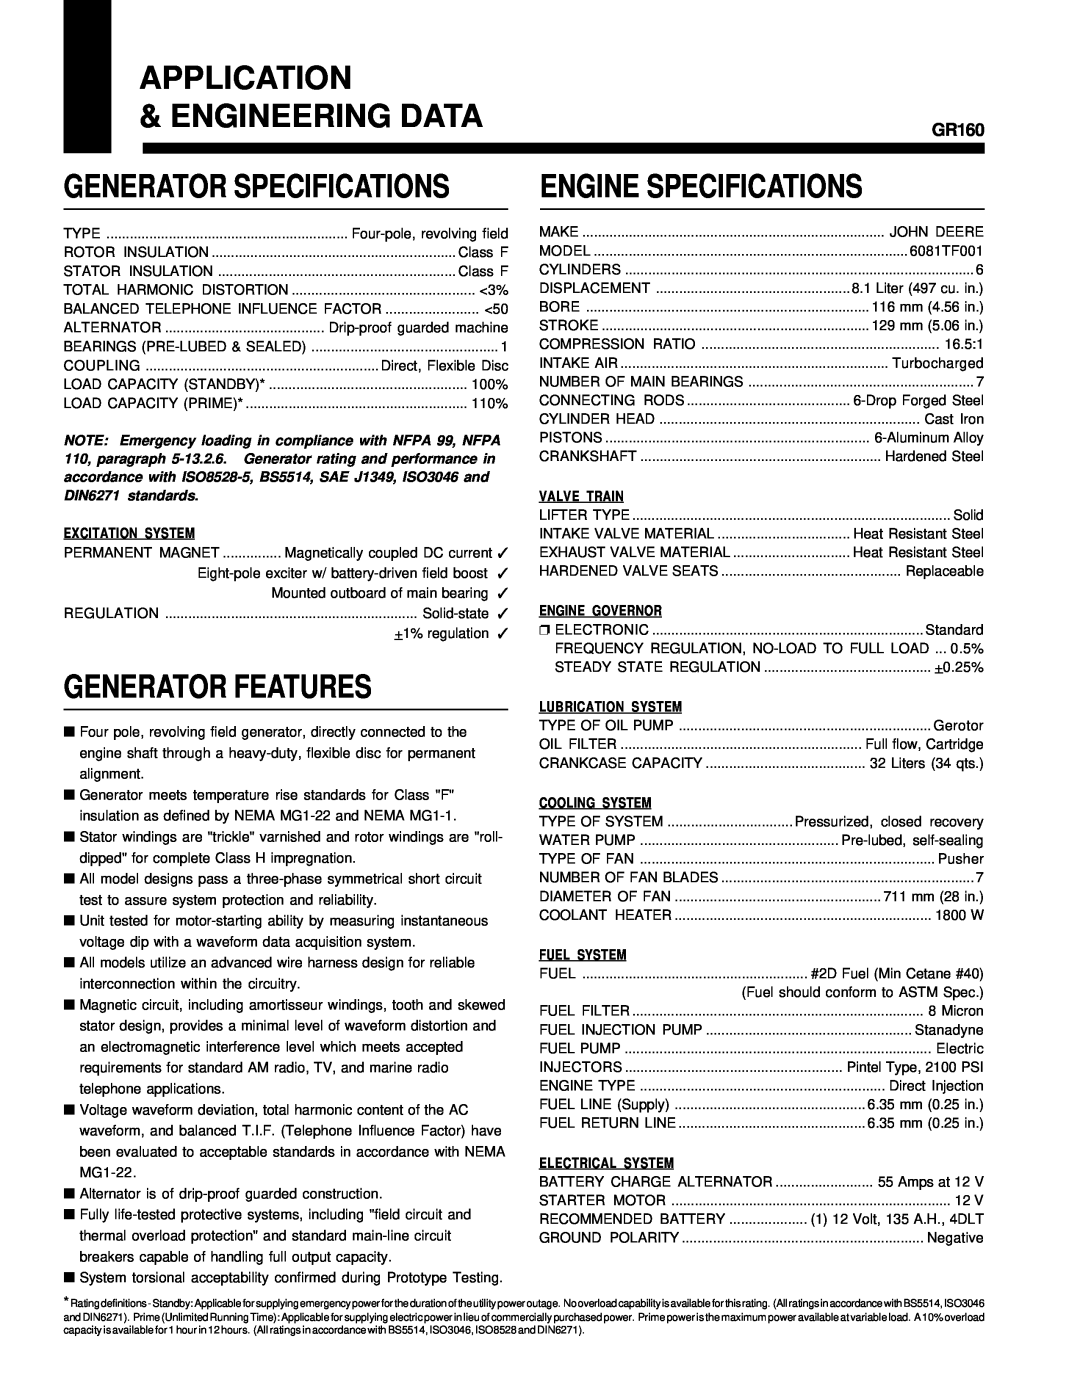 Generac GR160 manual Application, Engineering Data, Engine Specifications, Generator Features, Generator Specifications 